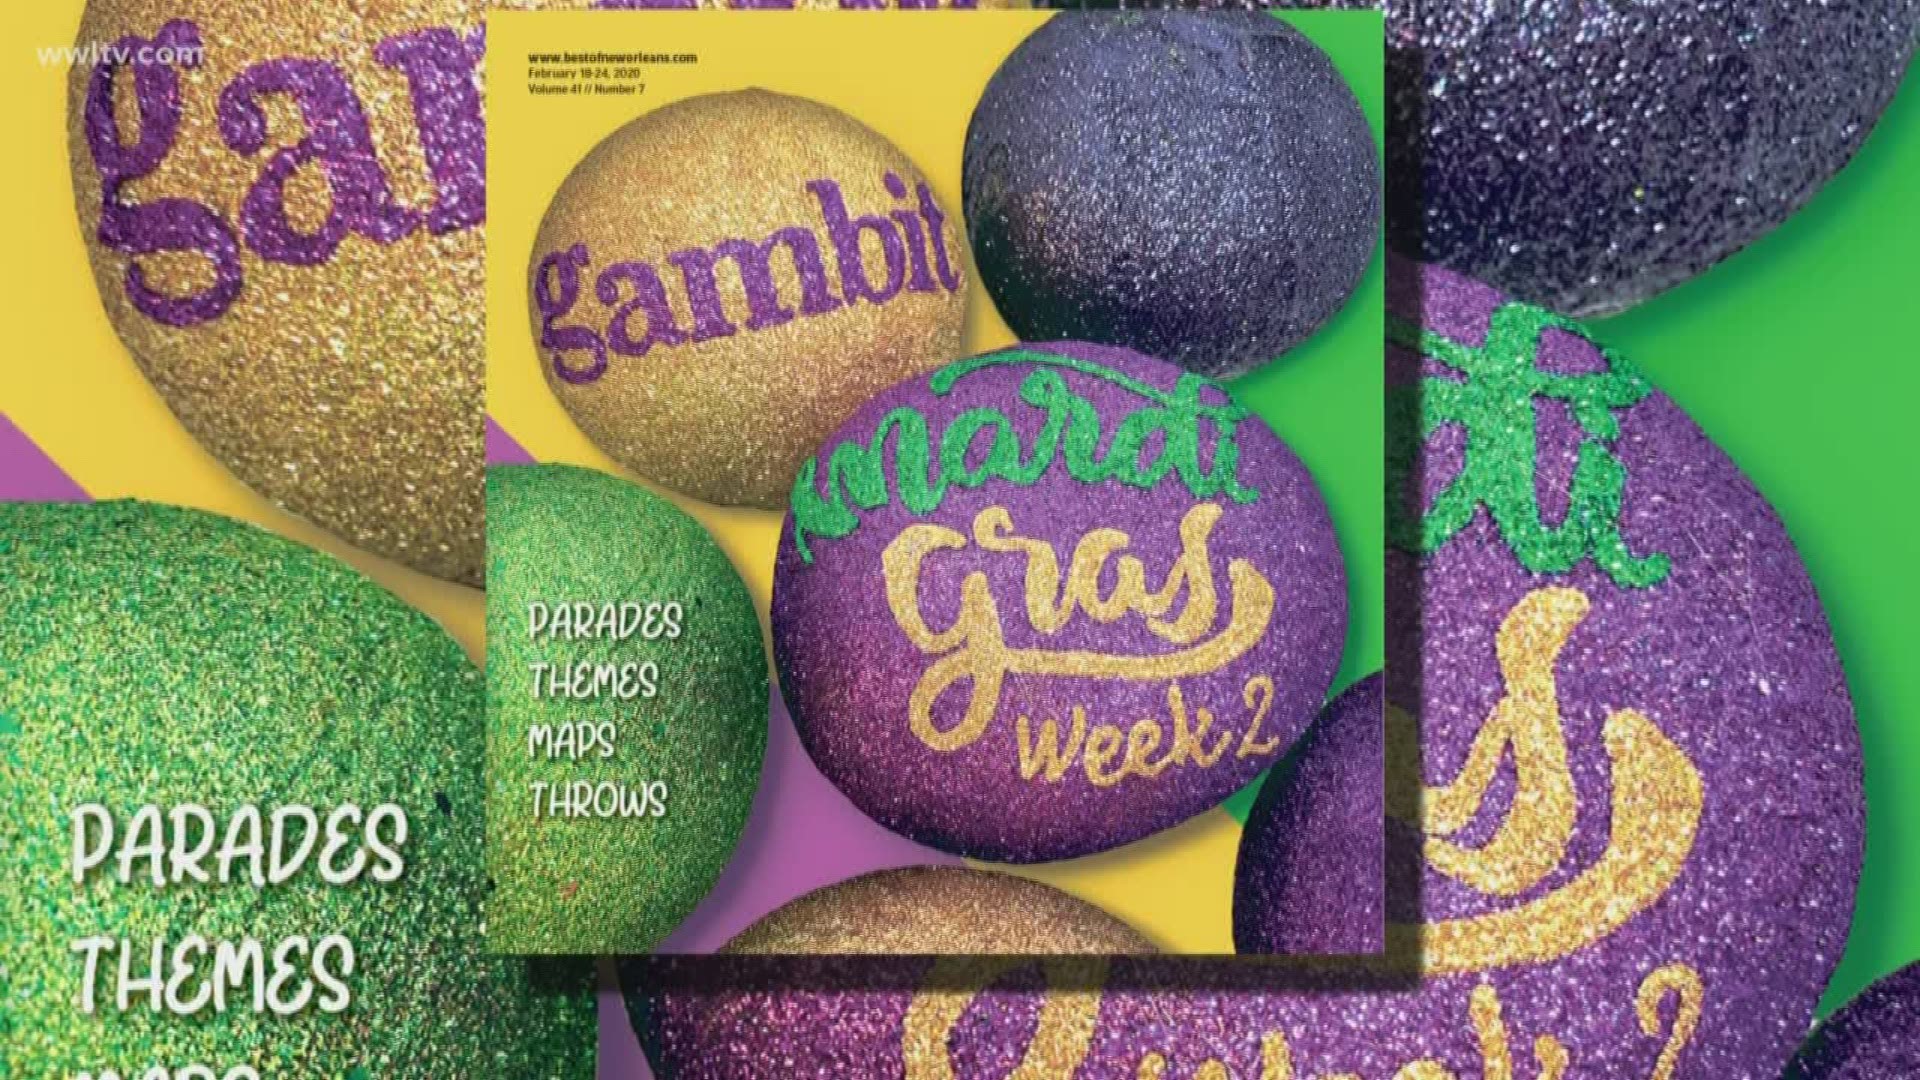 Gambit arts & entertainment editor Will Coviello joins us once again to talk Mardi Gras and preview the magazine's latest edition ahead of its release!